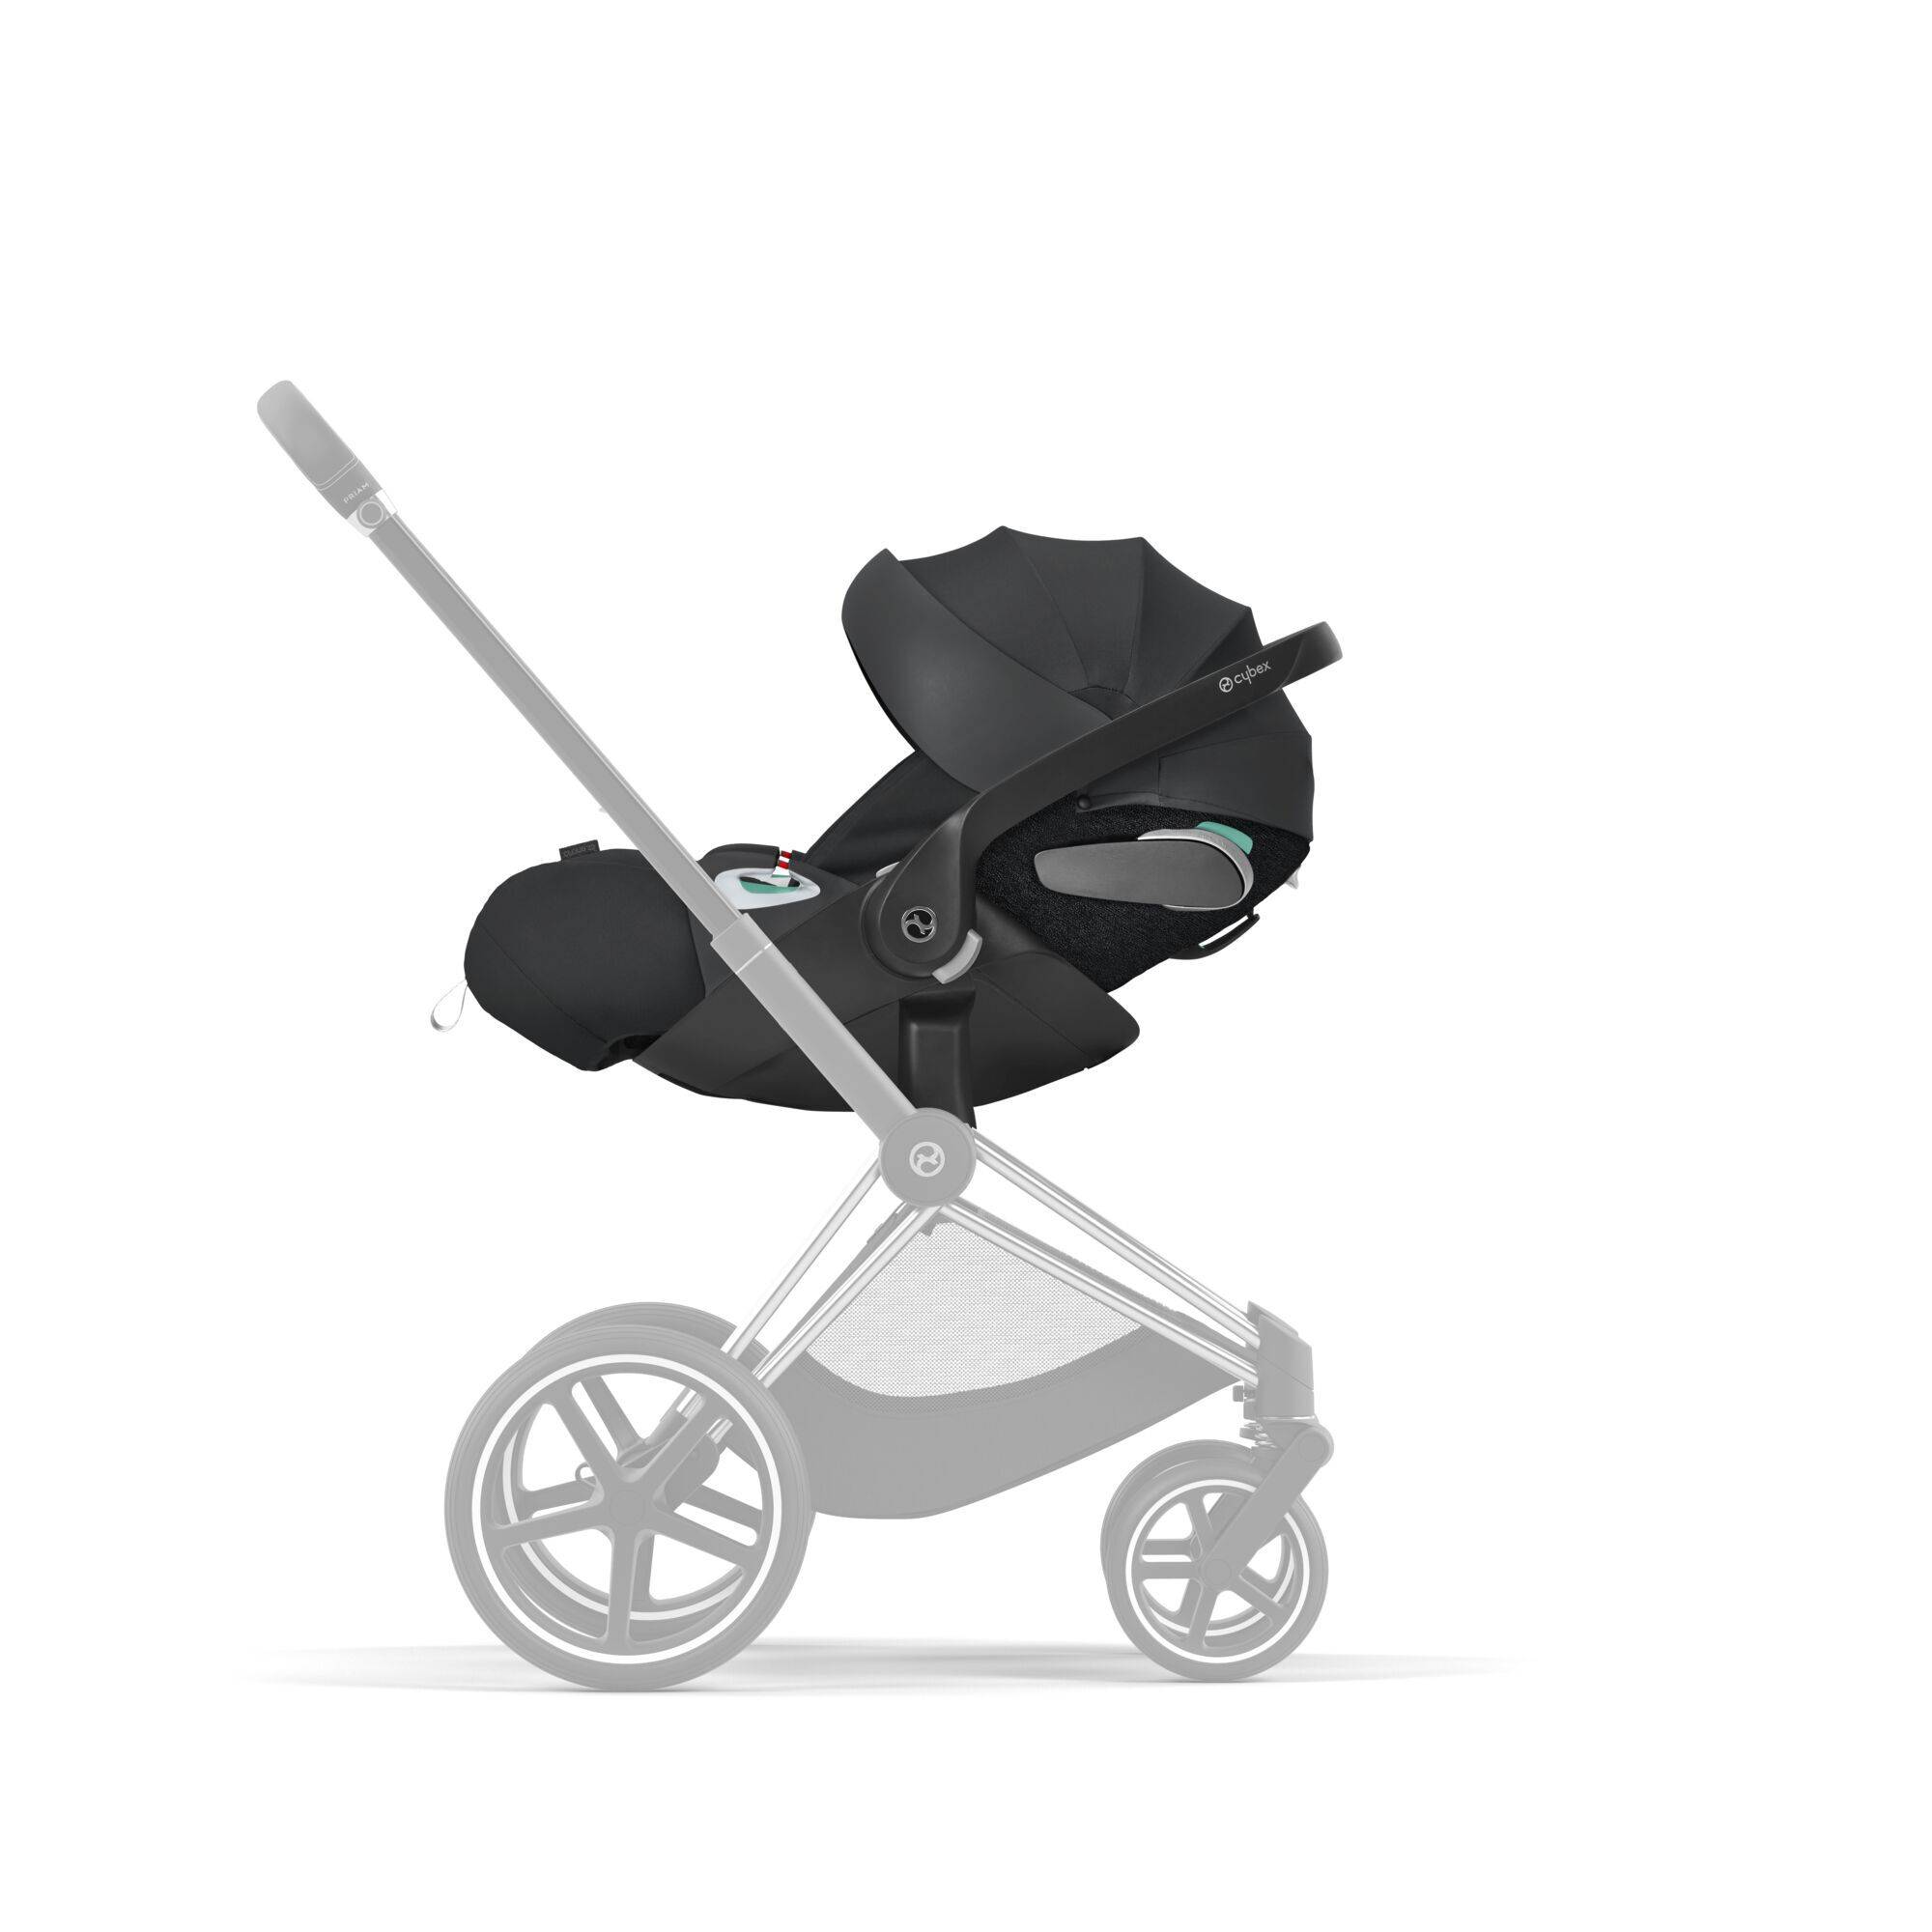 CYBEX CLOUD Z2 iSize - Deep Black S | Mamatoto - Mother & Child 